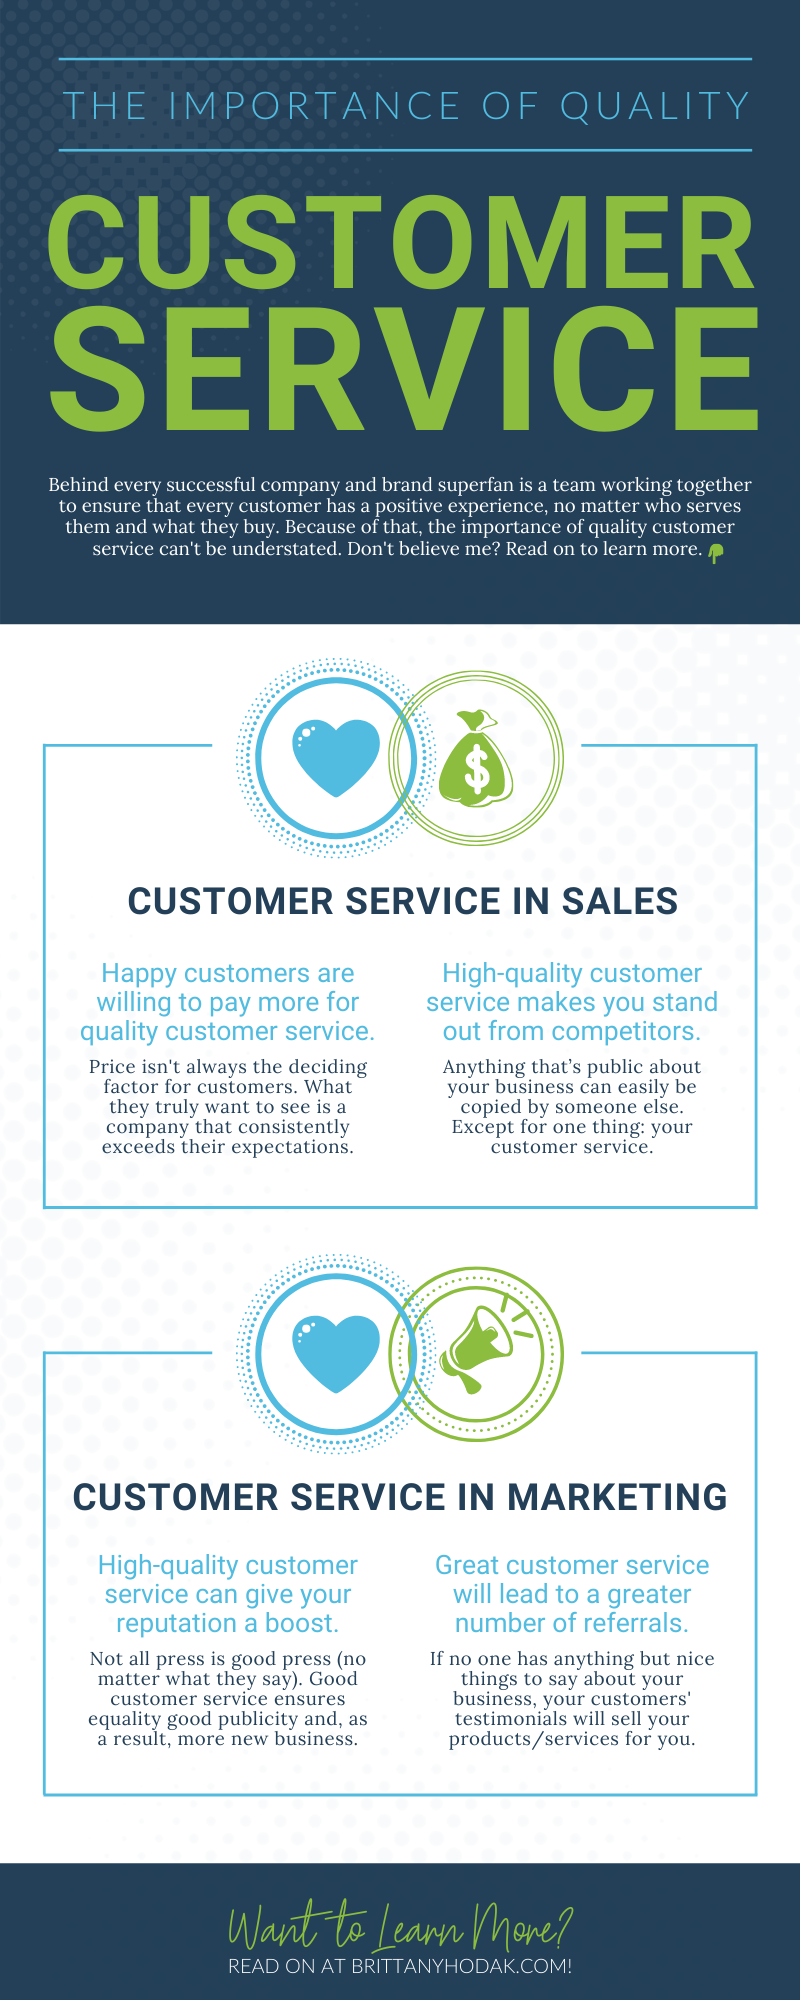 Infographic for The Importance of Quality Customer Service - Brittany Hodak